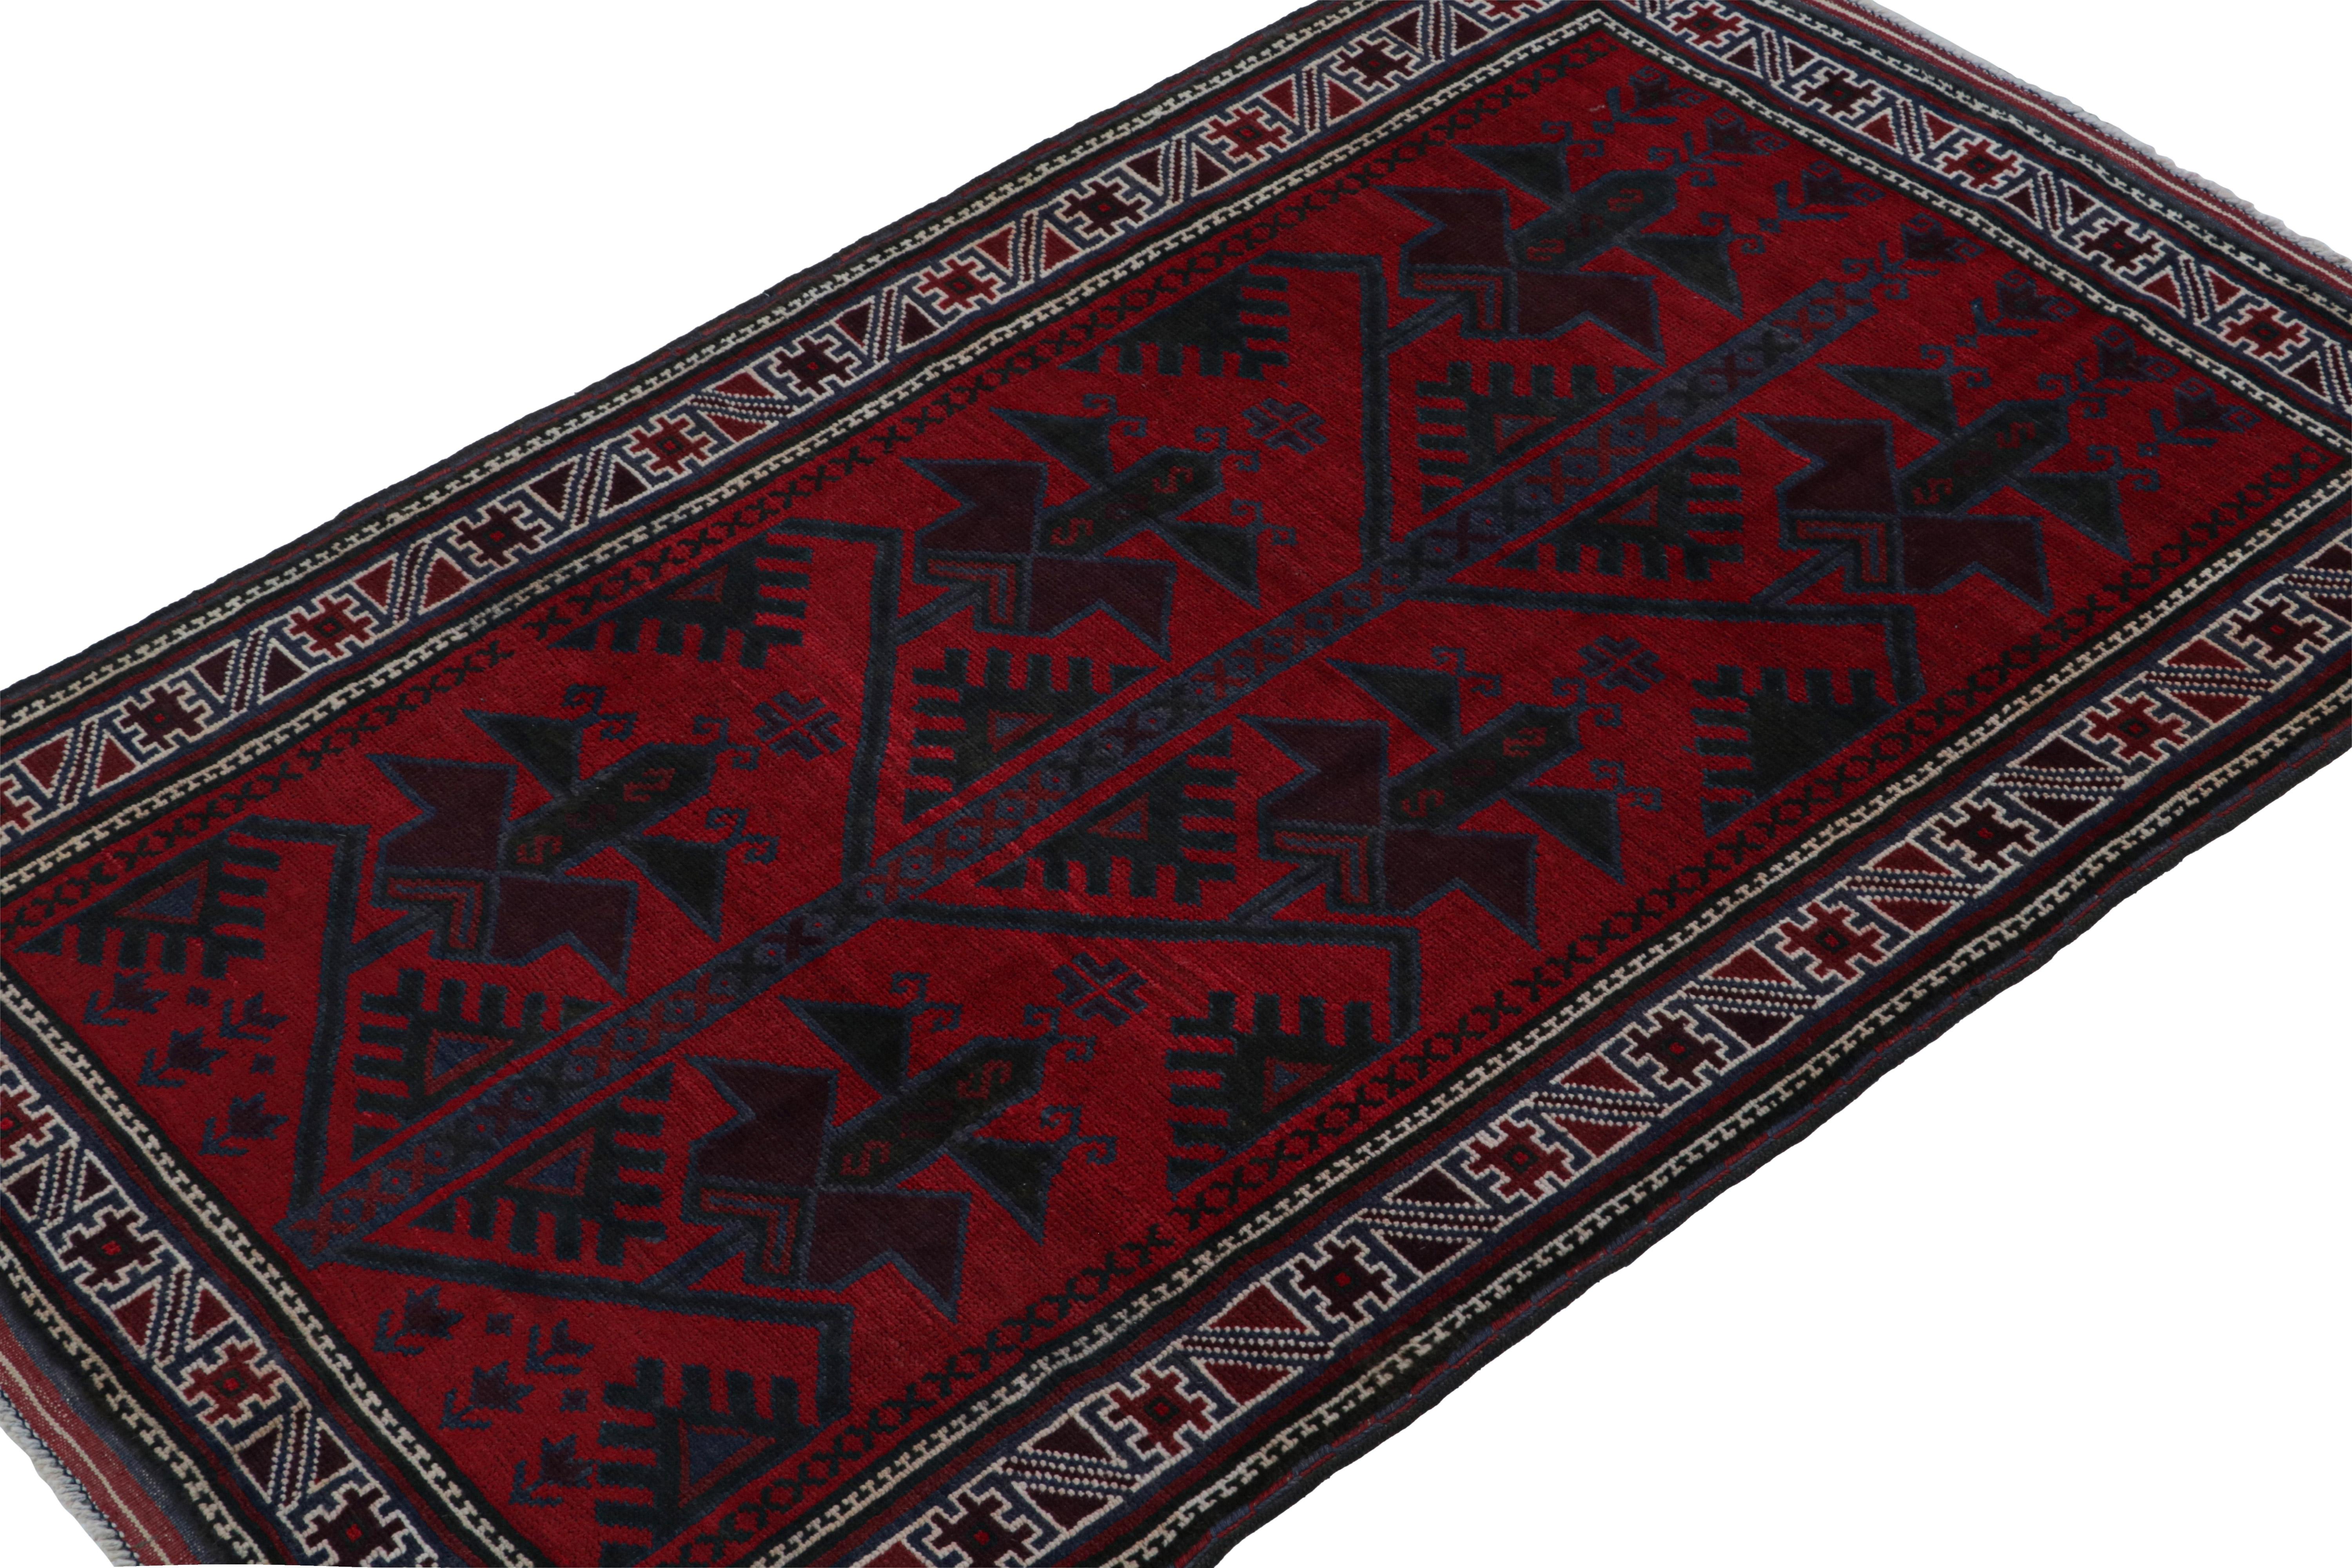 Hand-knotted in wool & goat hair, this vintage tribal rug of the 1950s is a coveted addition to Rug & Kilim’s Antique & Vintage collection. 

On the Design: 

Coming from the Baluch tribe, this 5x7 rug boasts traditional patterns in rich tones of